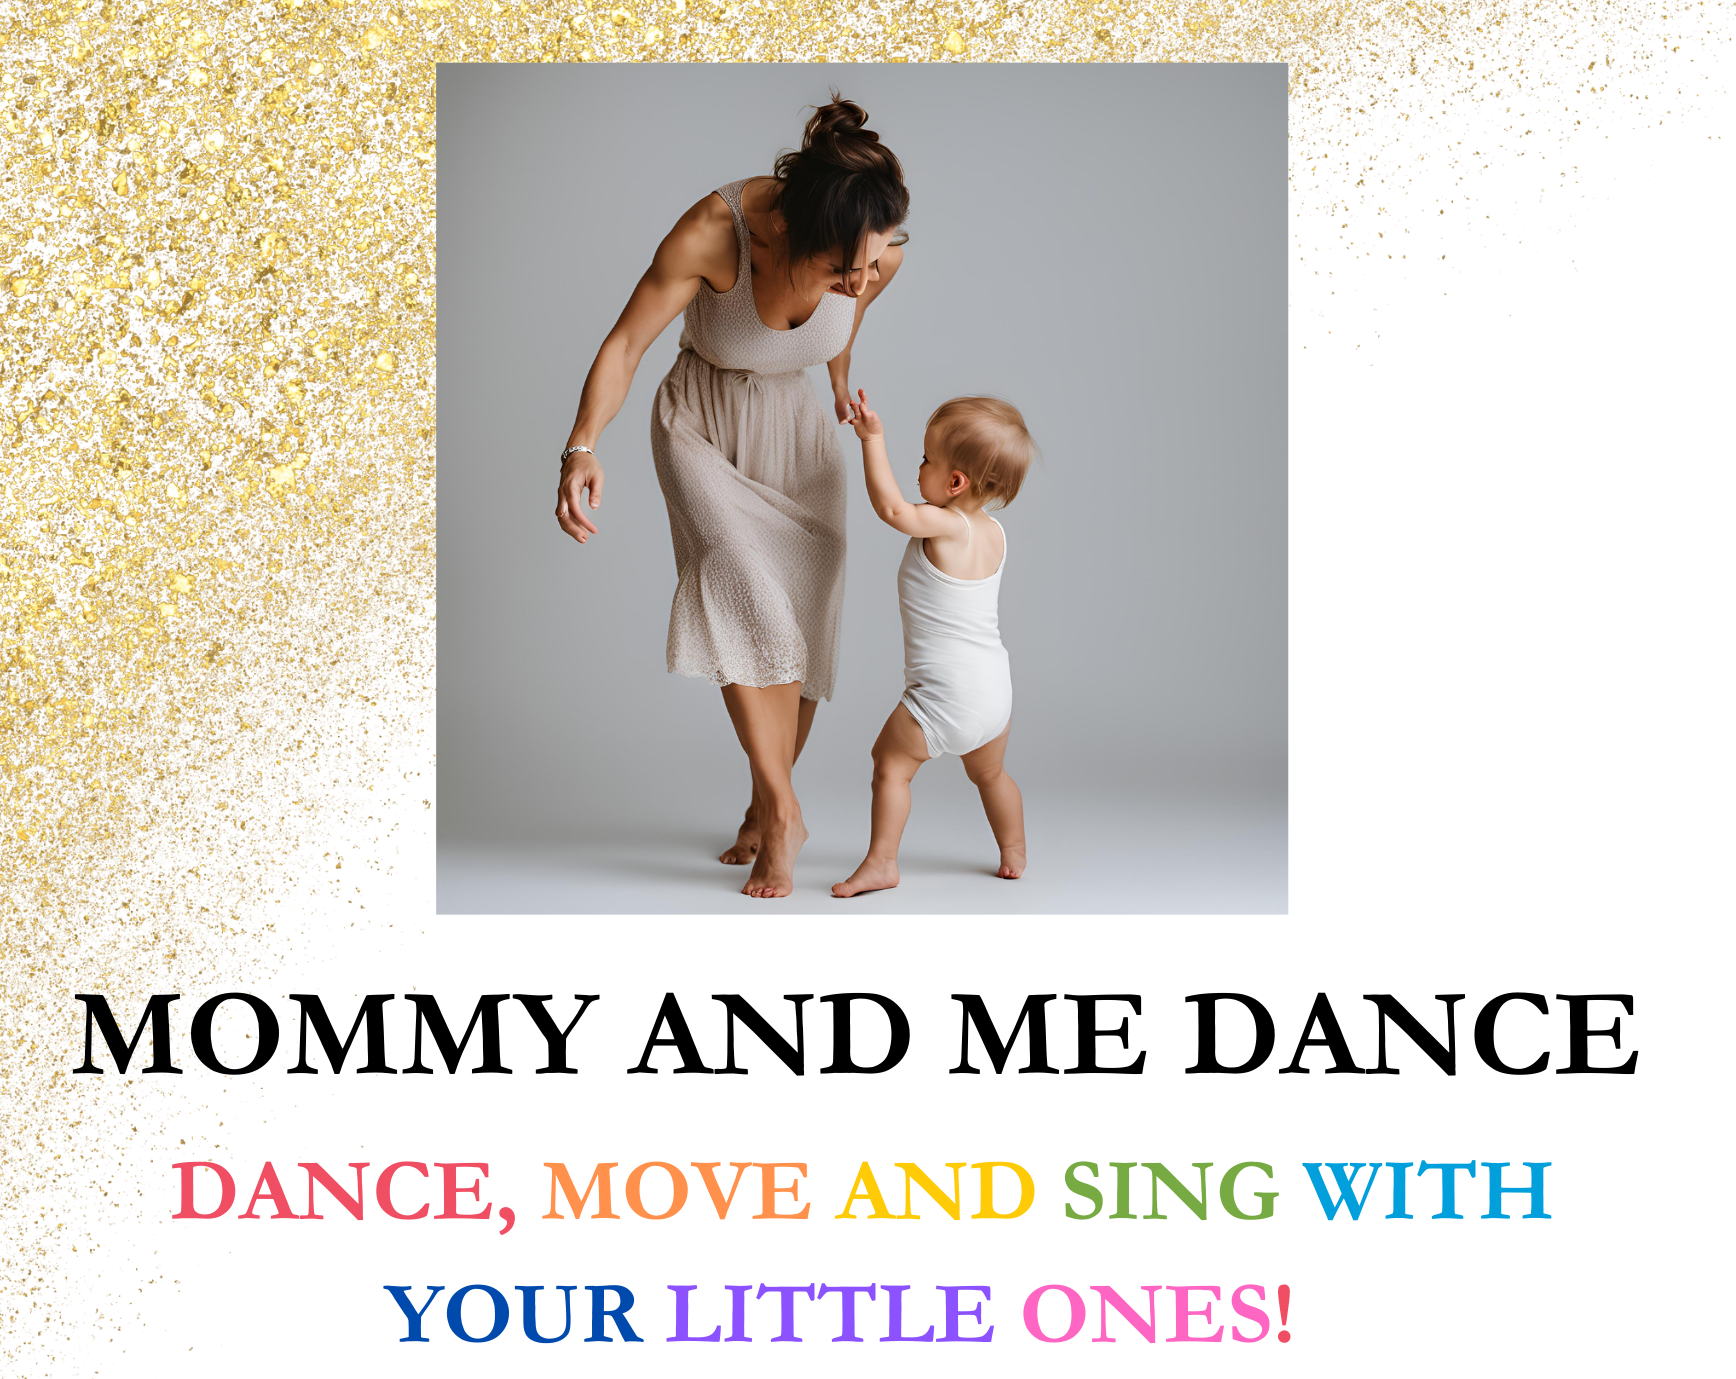 Mommy and Me Dance event flyer